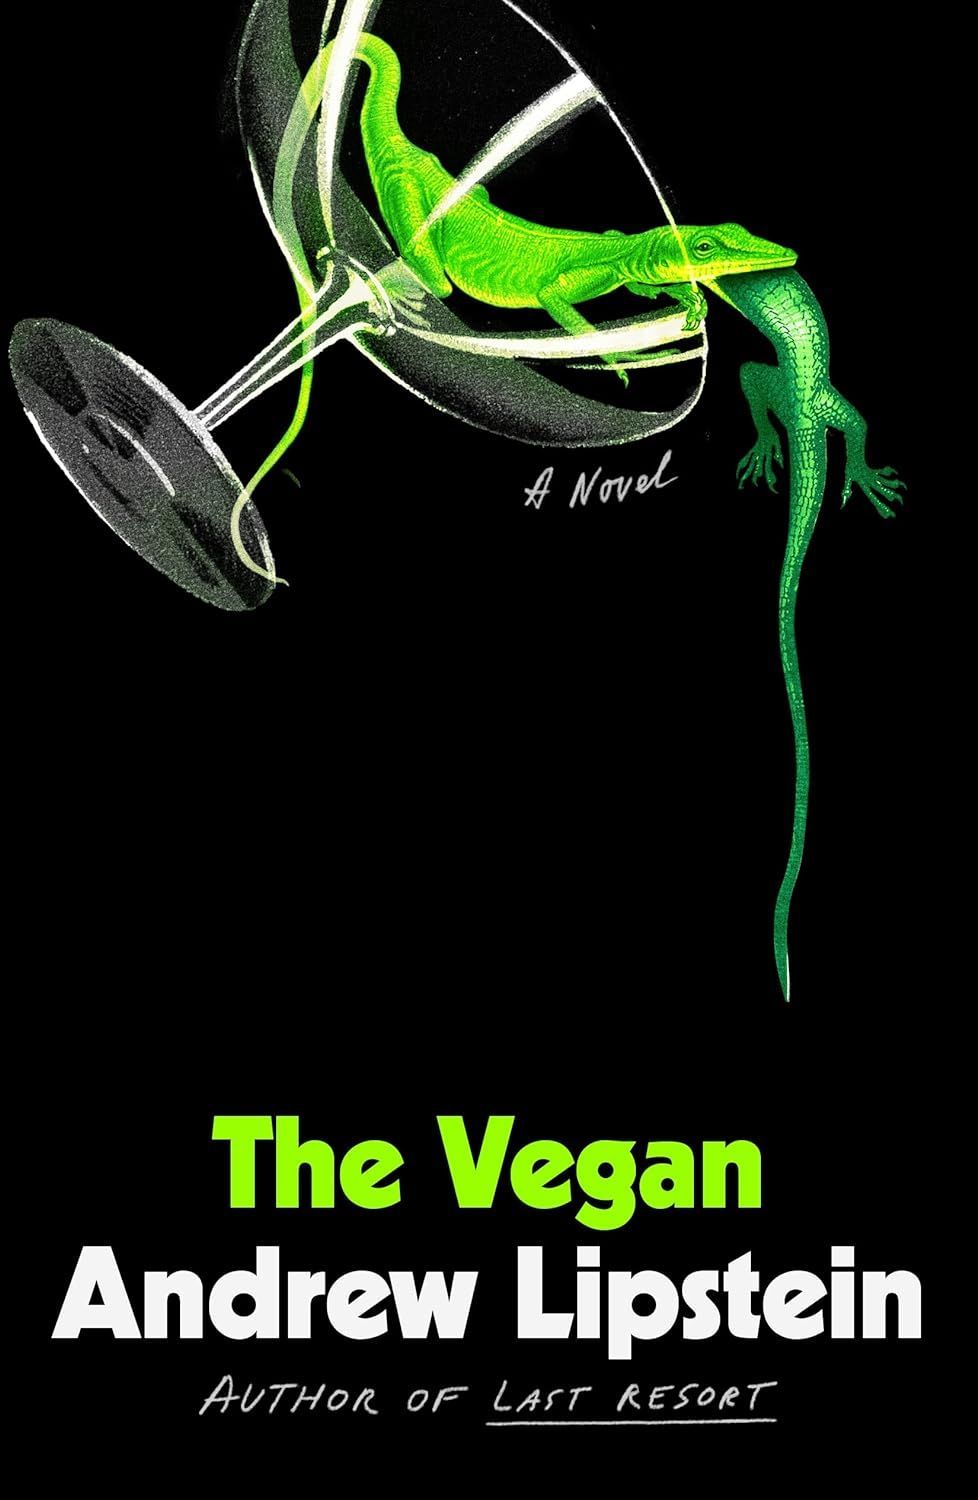 Allegedly Rational: On Andrew Lipstein’s “The Vegan”